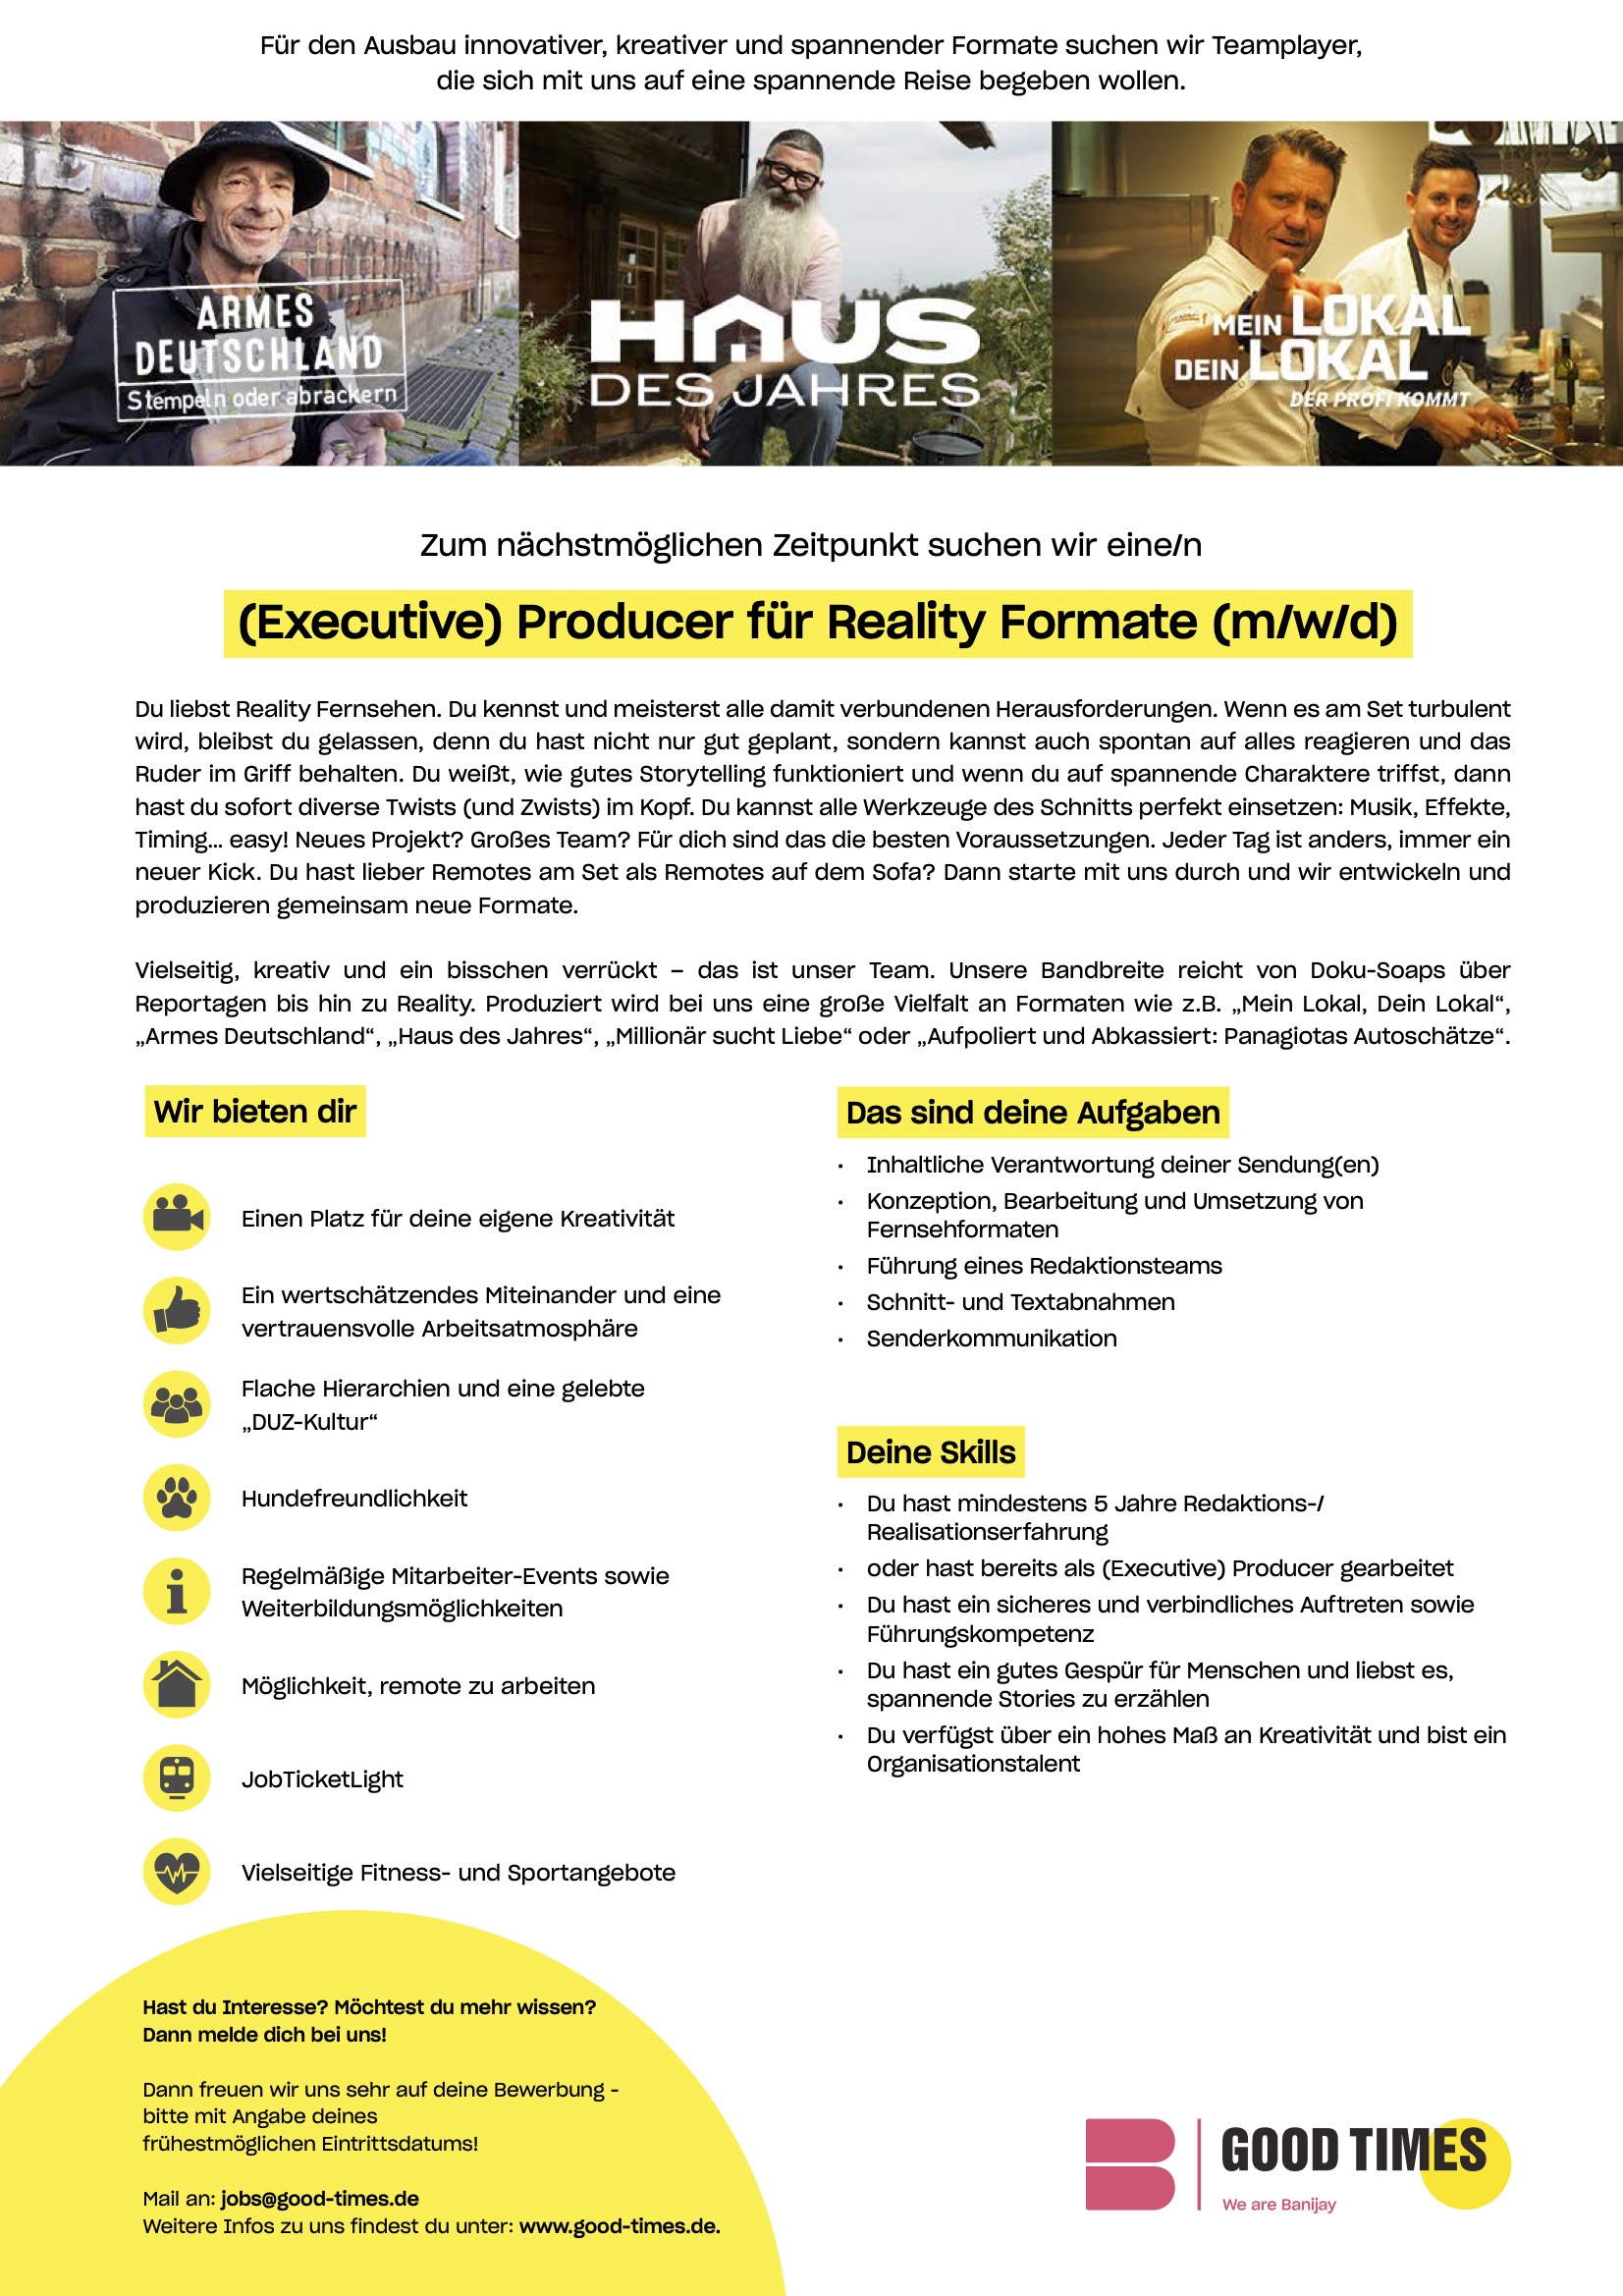 (Executive) Producer für Reality Formate (m/w/d)